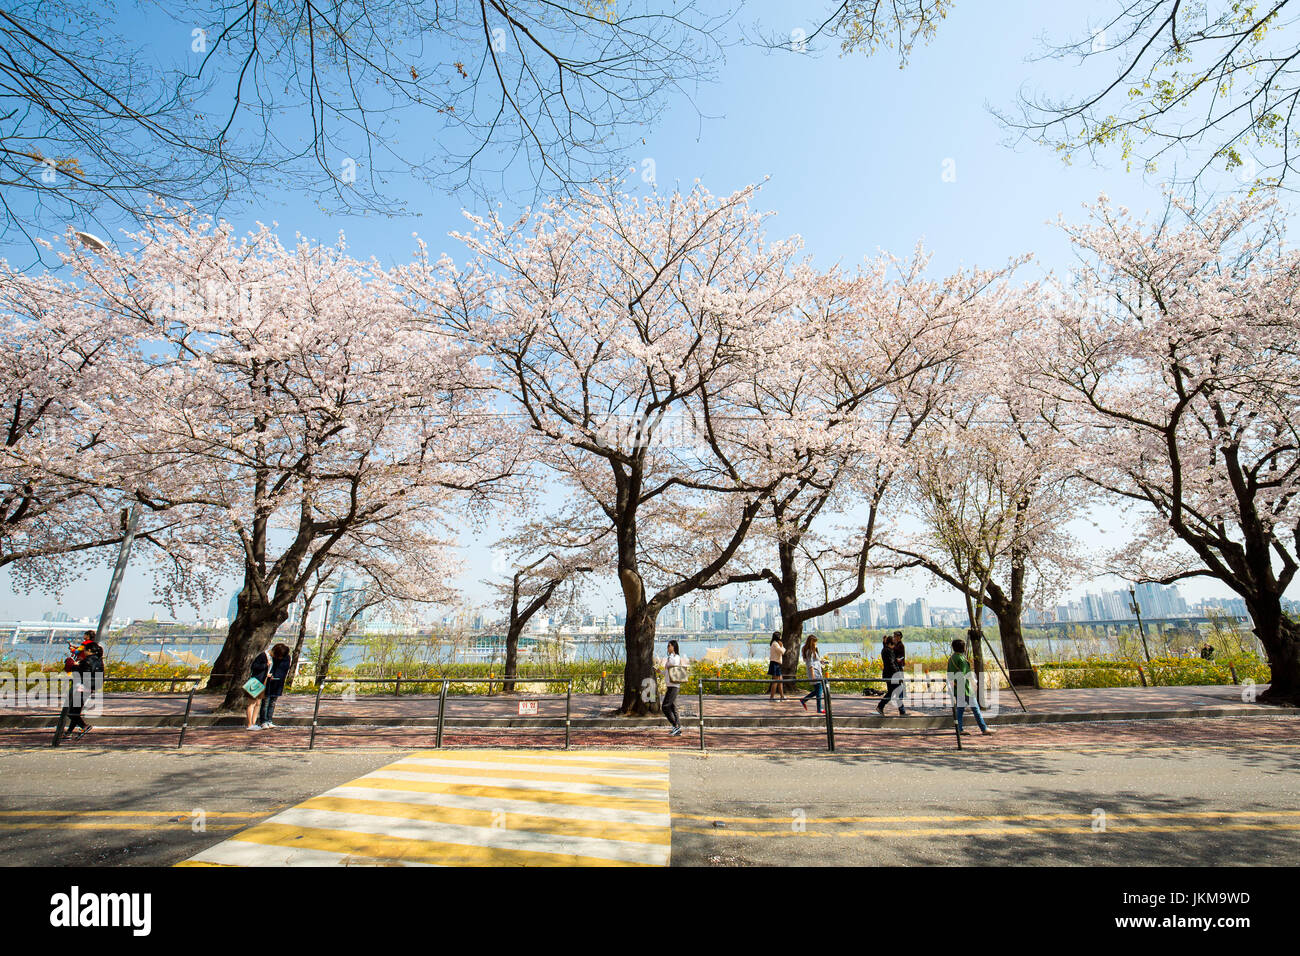 Cherry Blossom Festival in spring at Yeouido park Stock Photo